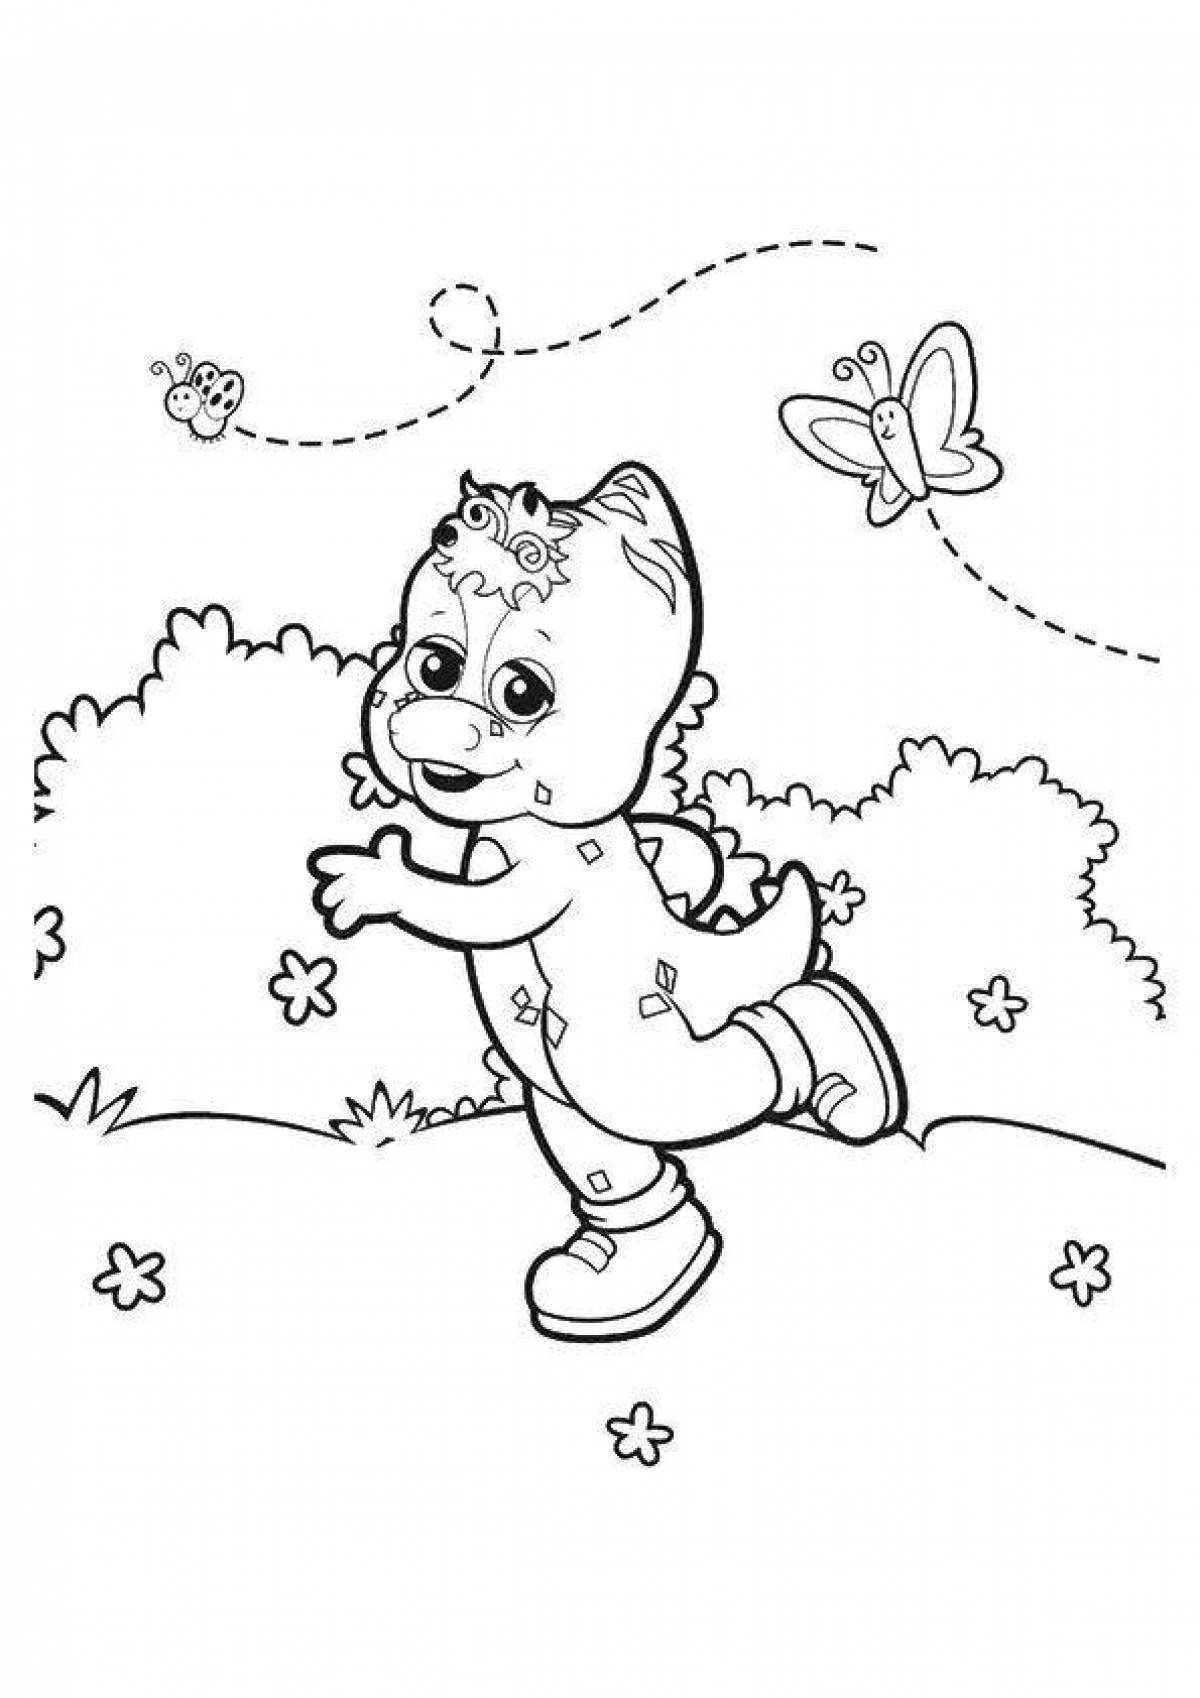 Colorful barney coloring page